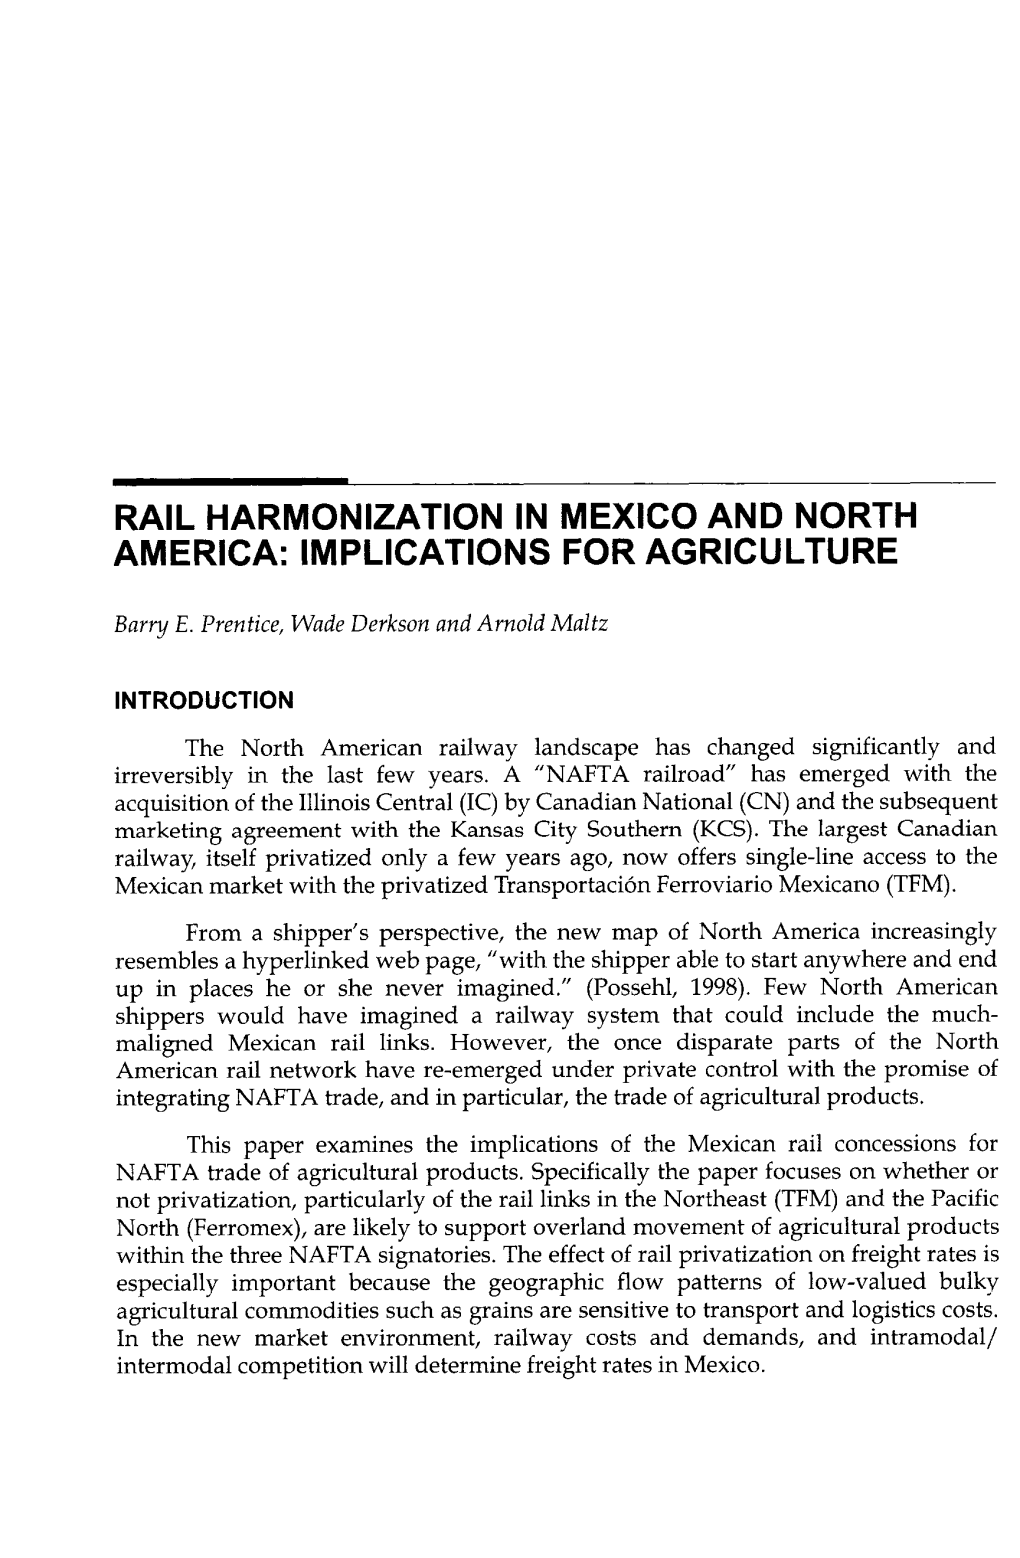 Rail Harmonization in Mexico and North America: Implications for Agriculture